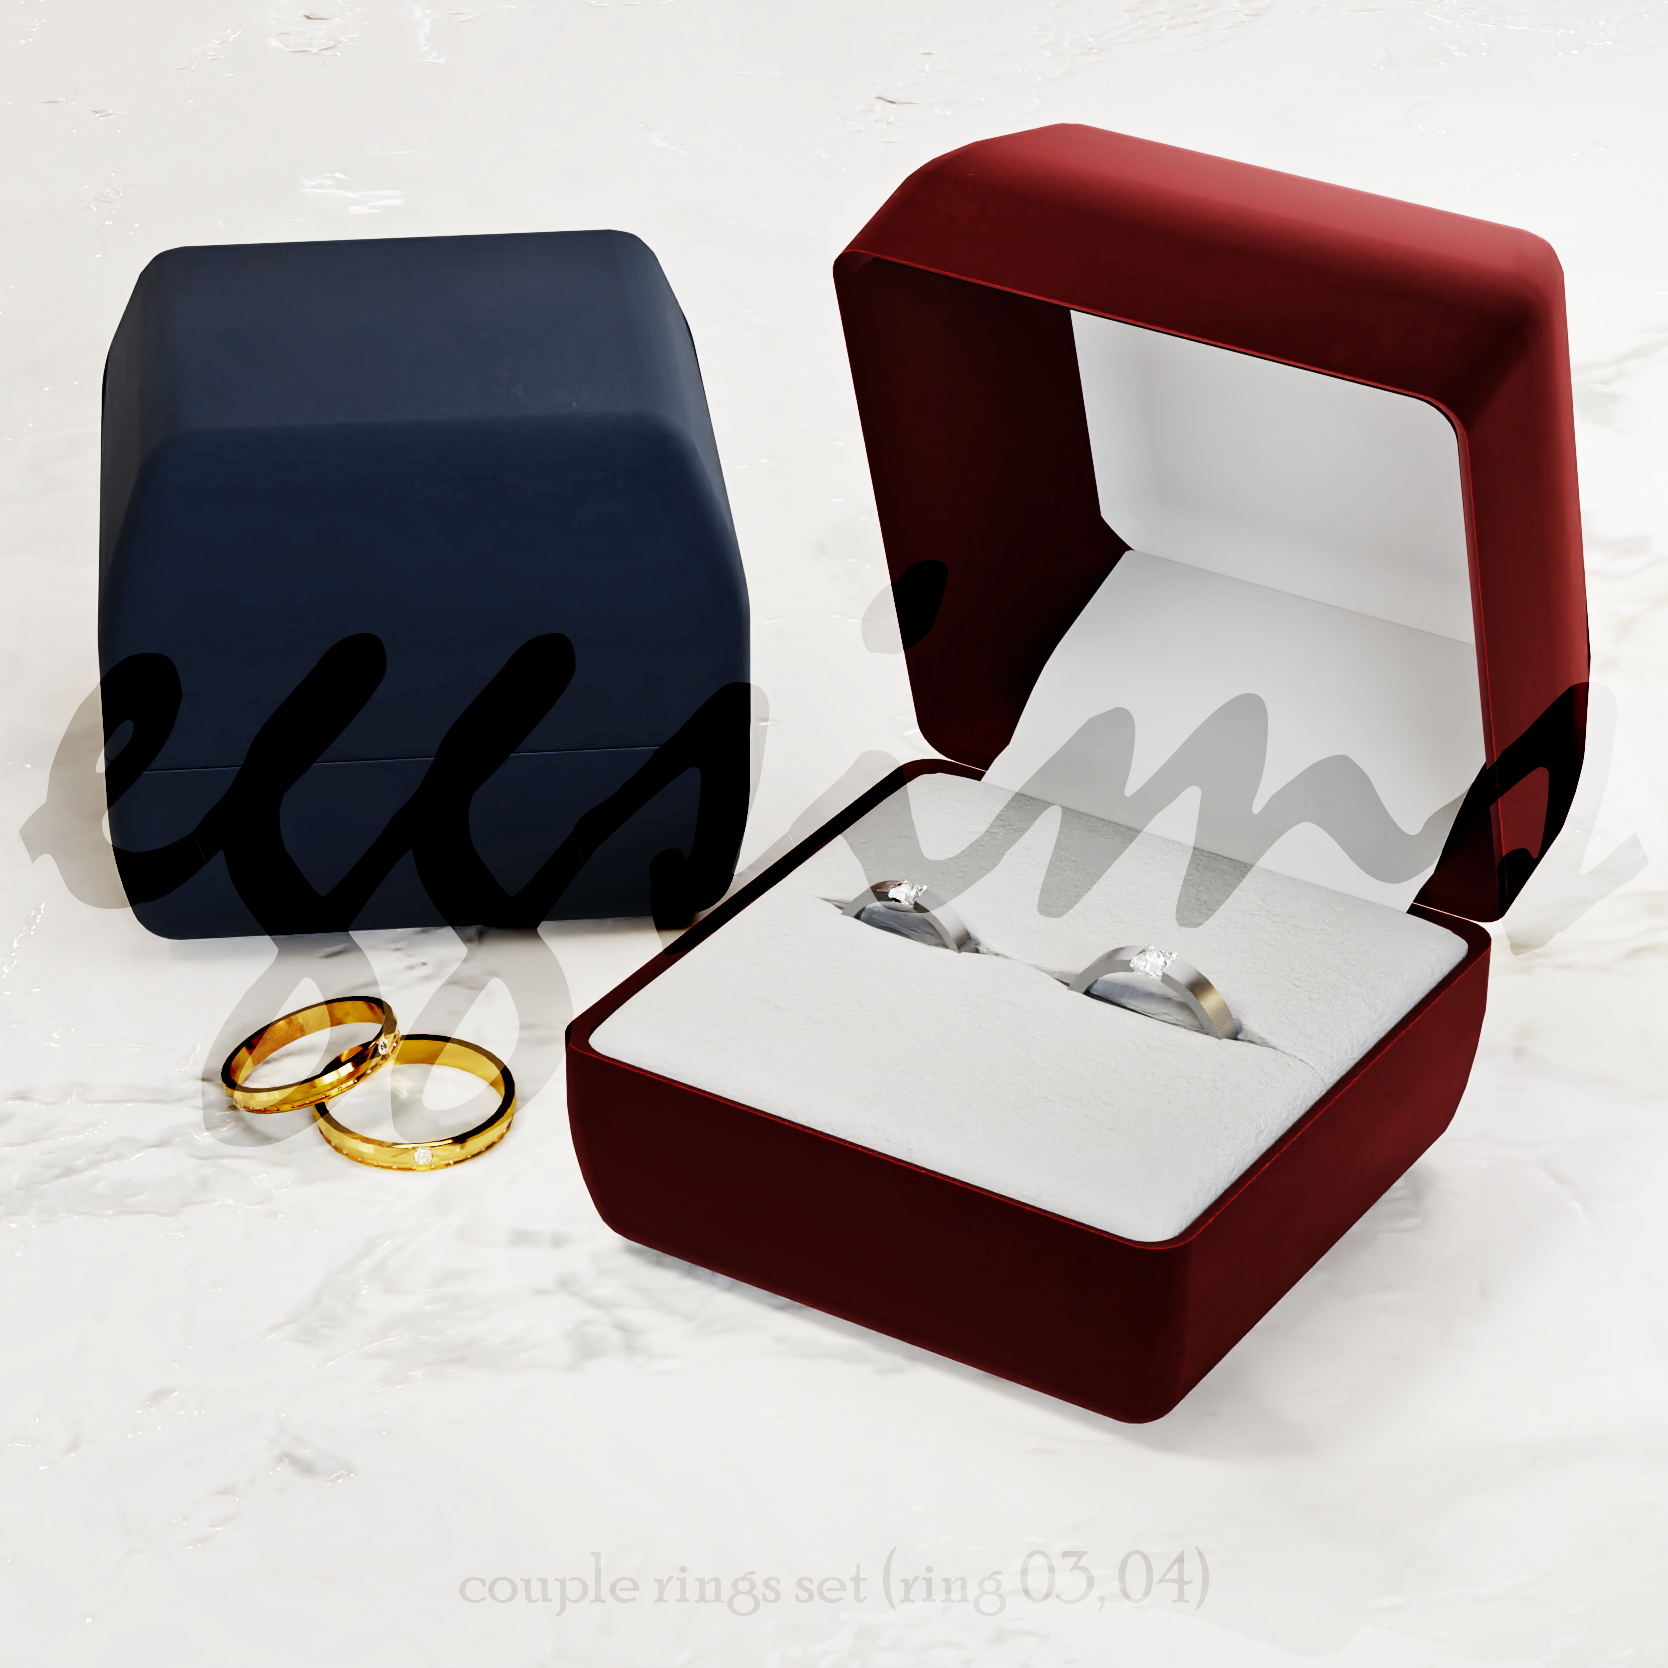 Download Couple rings Set - The Sims 4 Mods - CurseForge